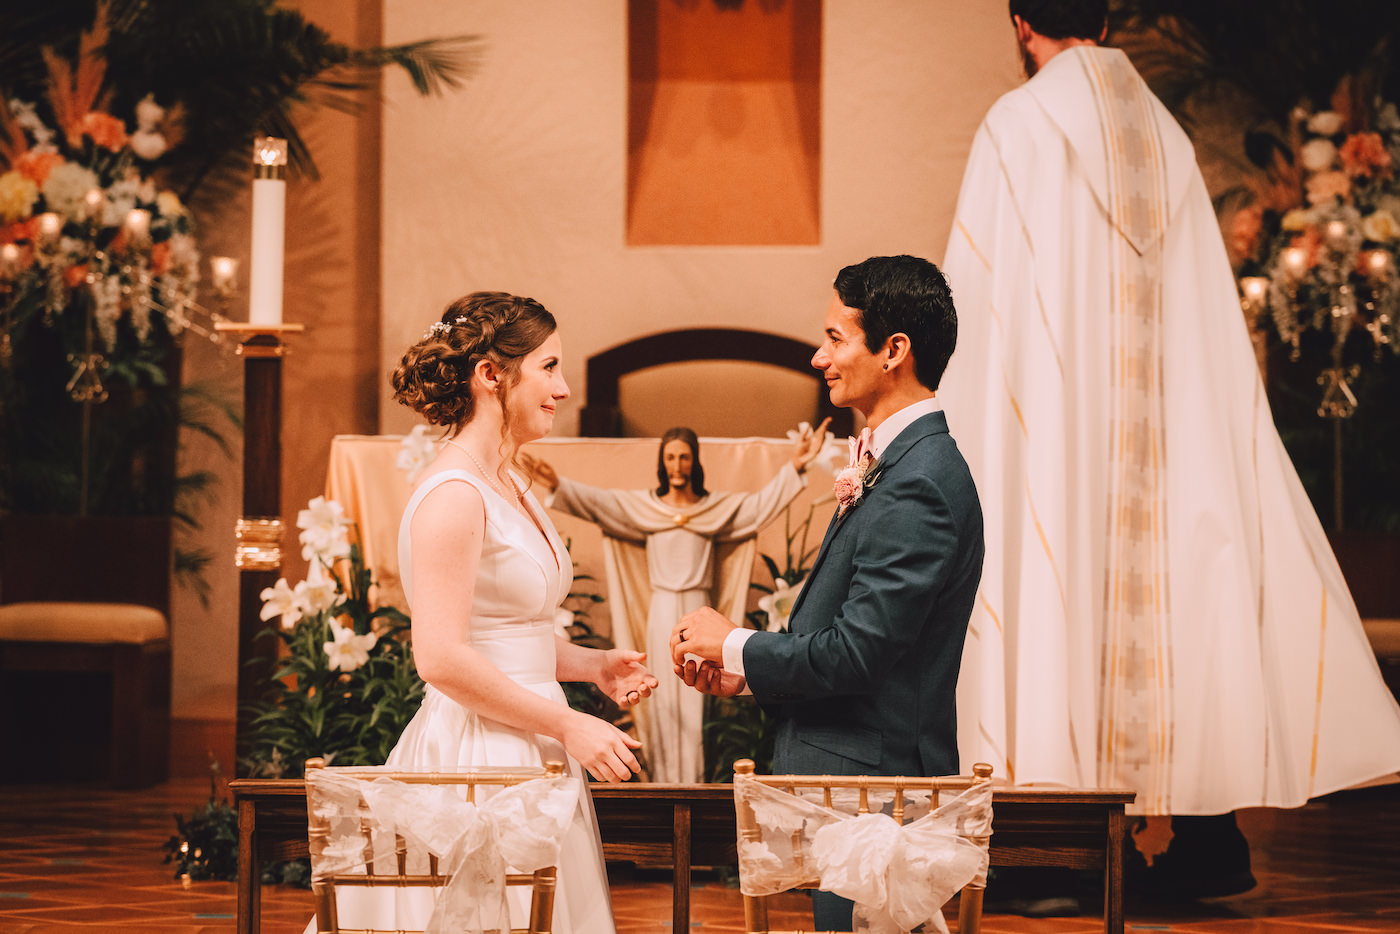 Florida Church Chapel Catholic Wedding Ceremony | Bride and Groom Exchanging Vows